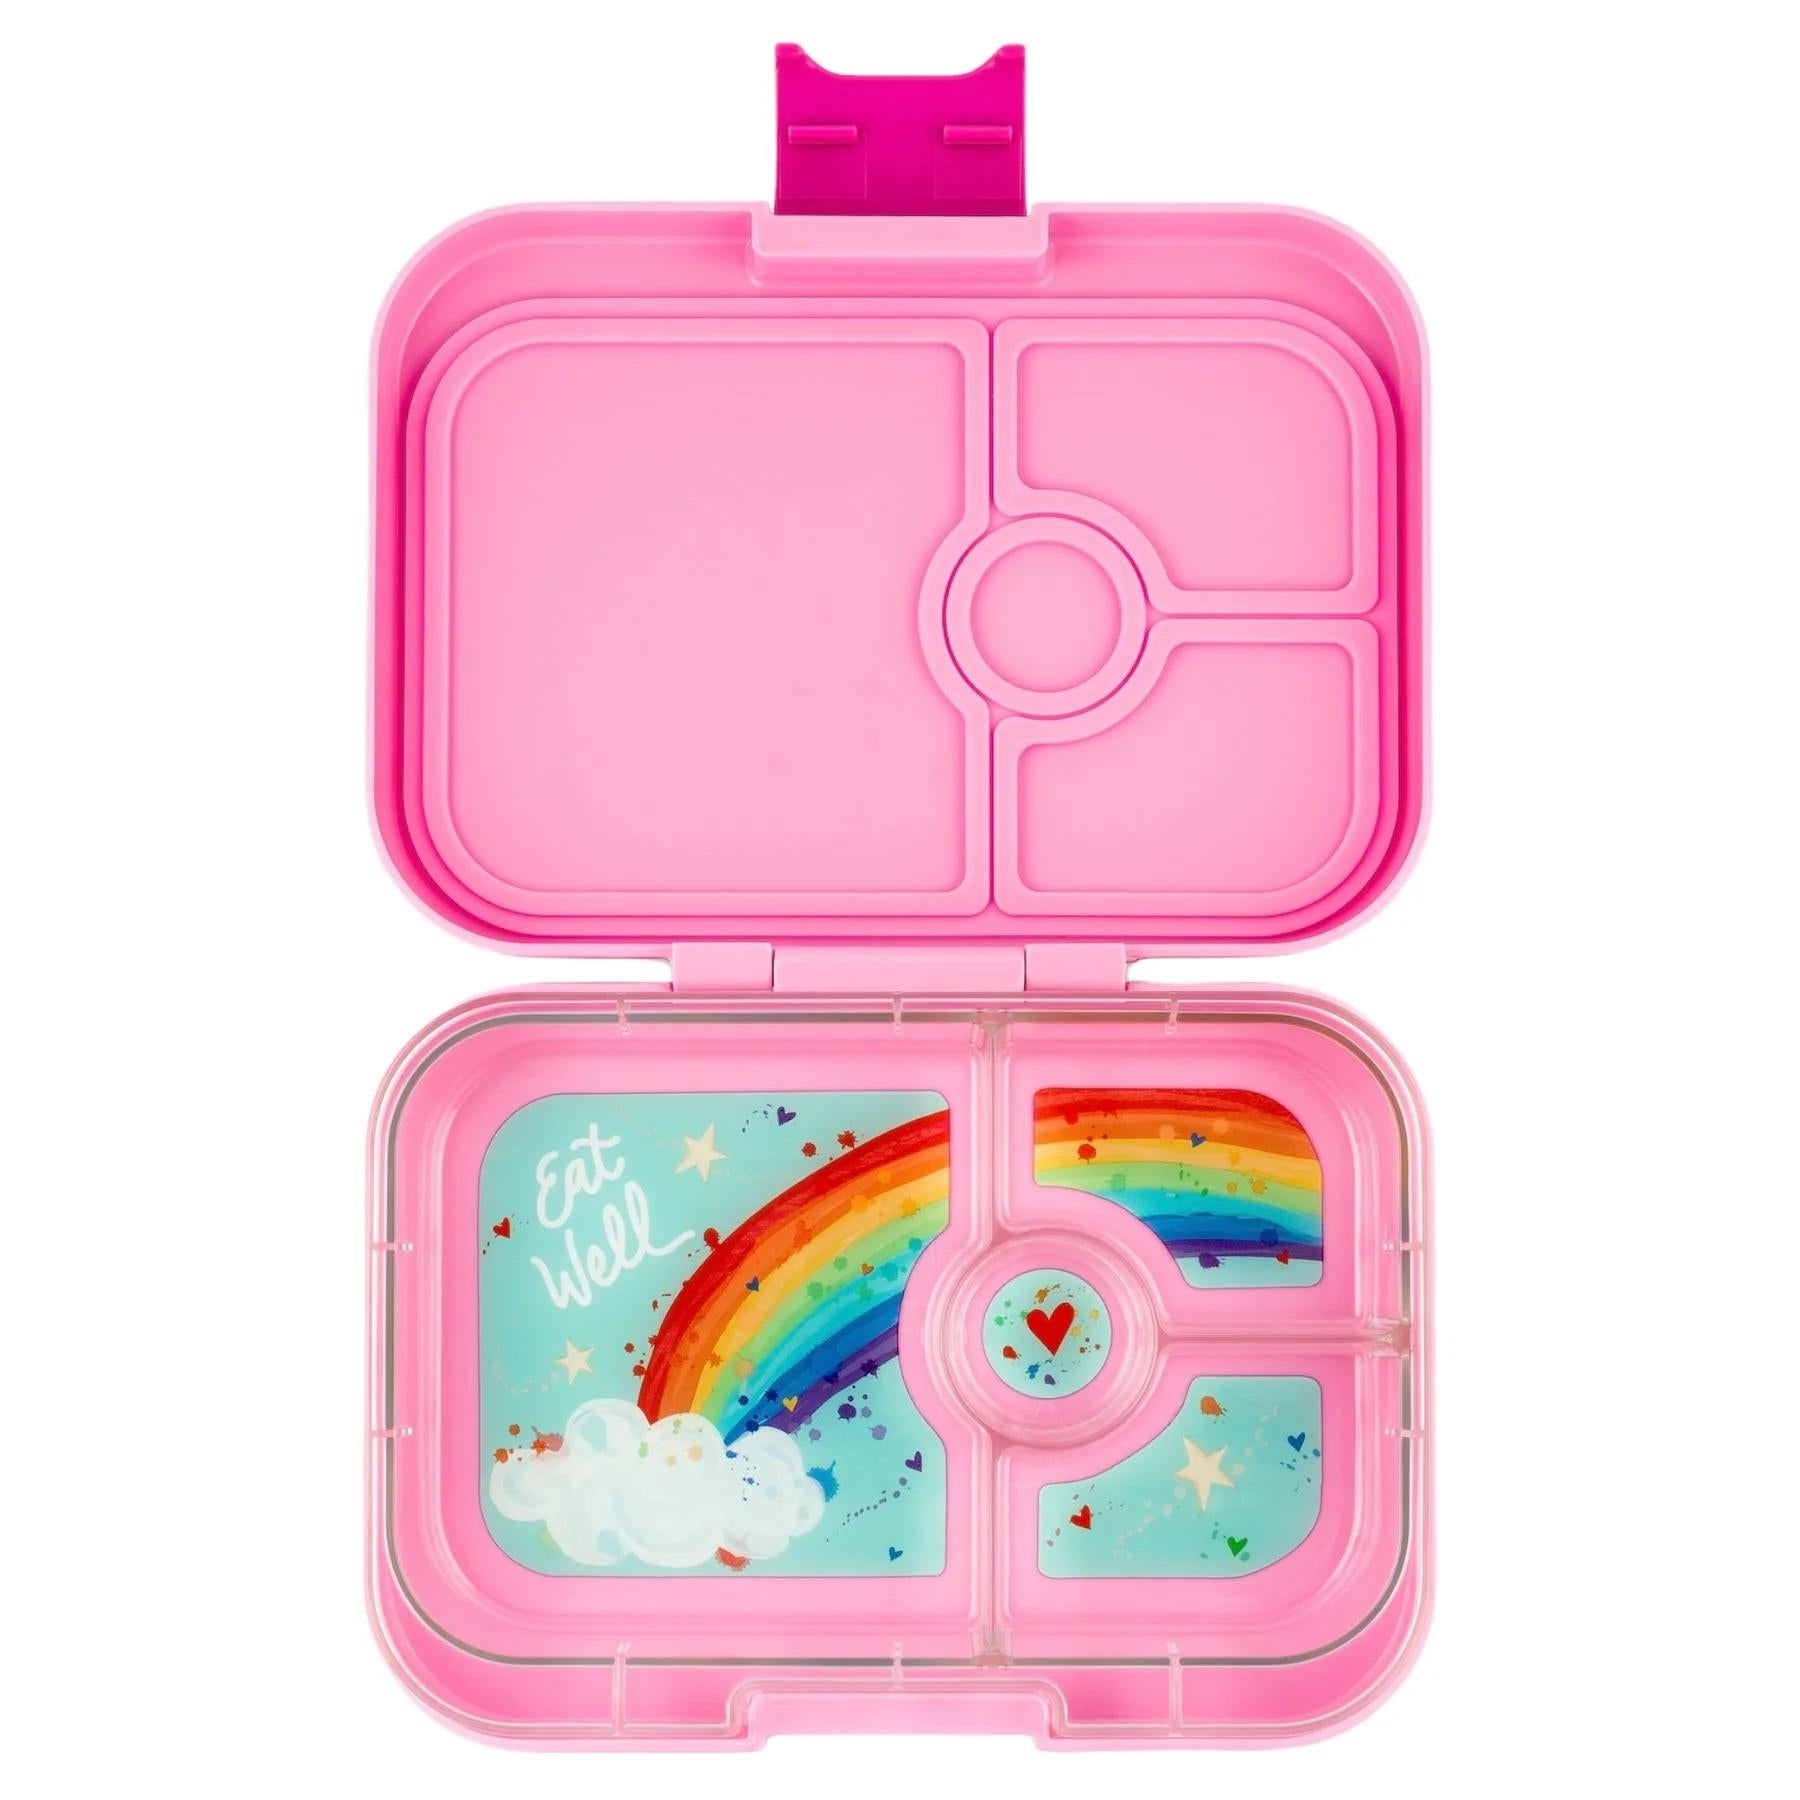 Yumbox Tapas with Botanical Tray Amalfi Pink 4-Compartment Lunch